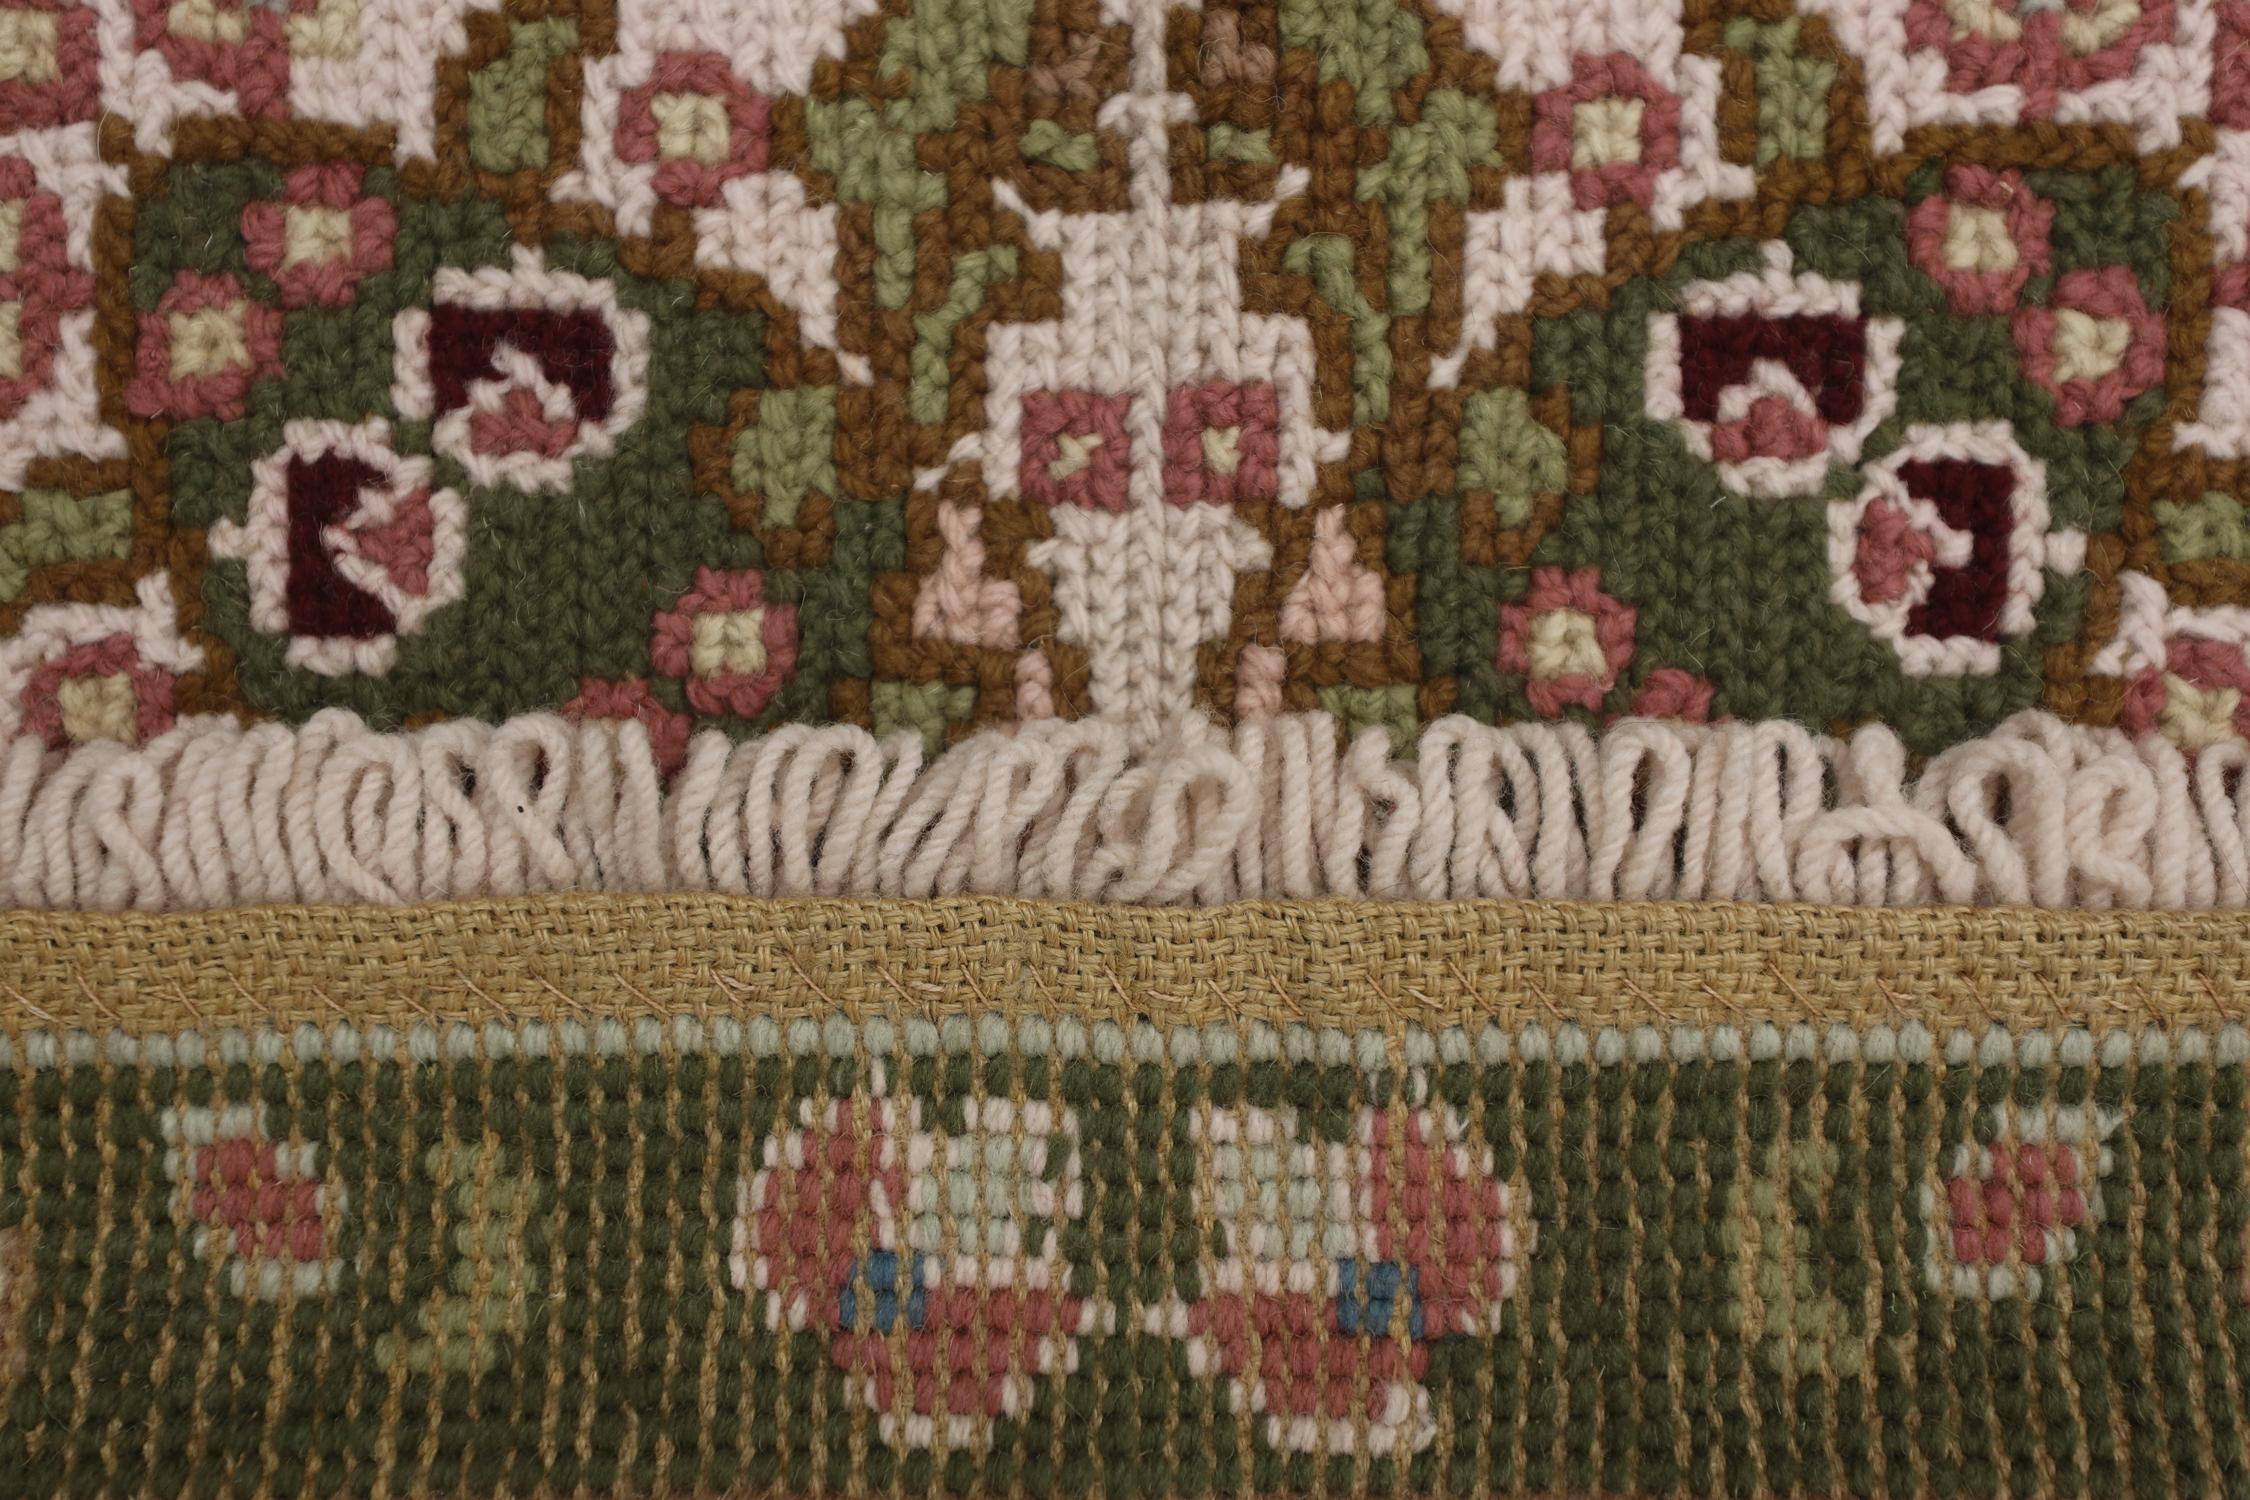 Pair of Handwoven Carpet Portuguese Needlepoint Rugs Wool Floral Rugs 65x135cm In Excellent Condition For Sale In Hampshire, GB